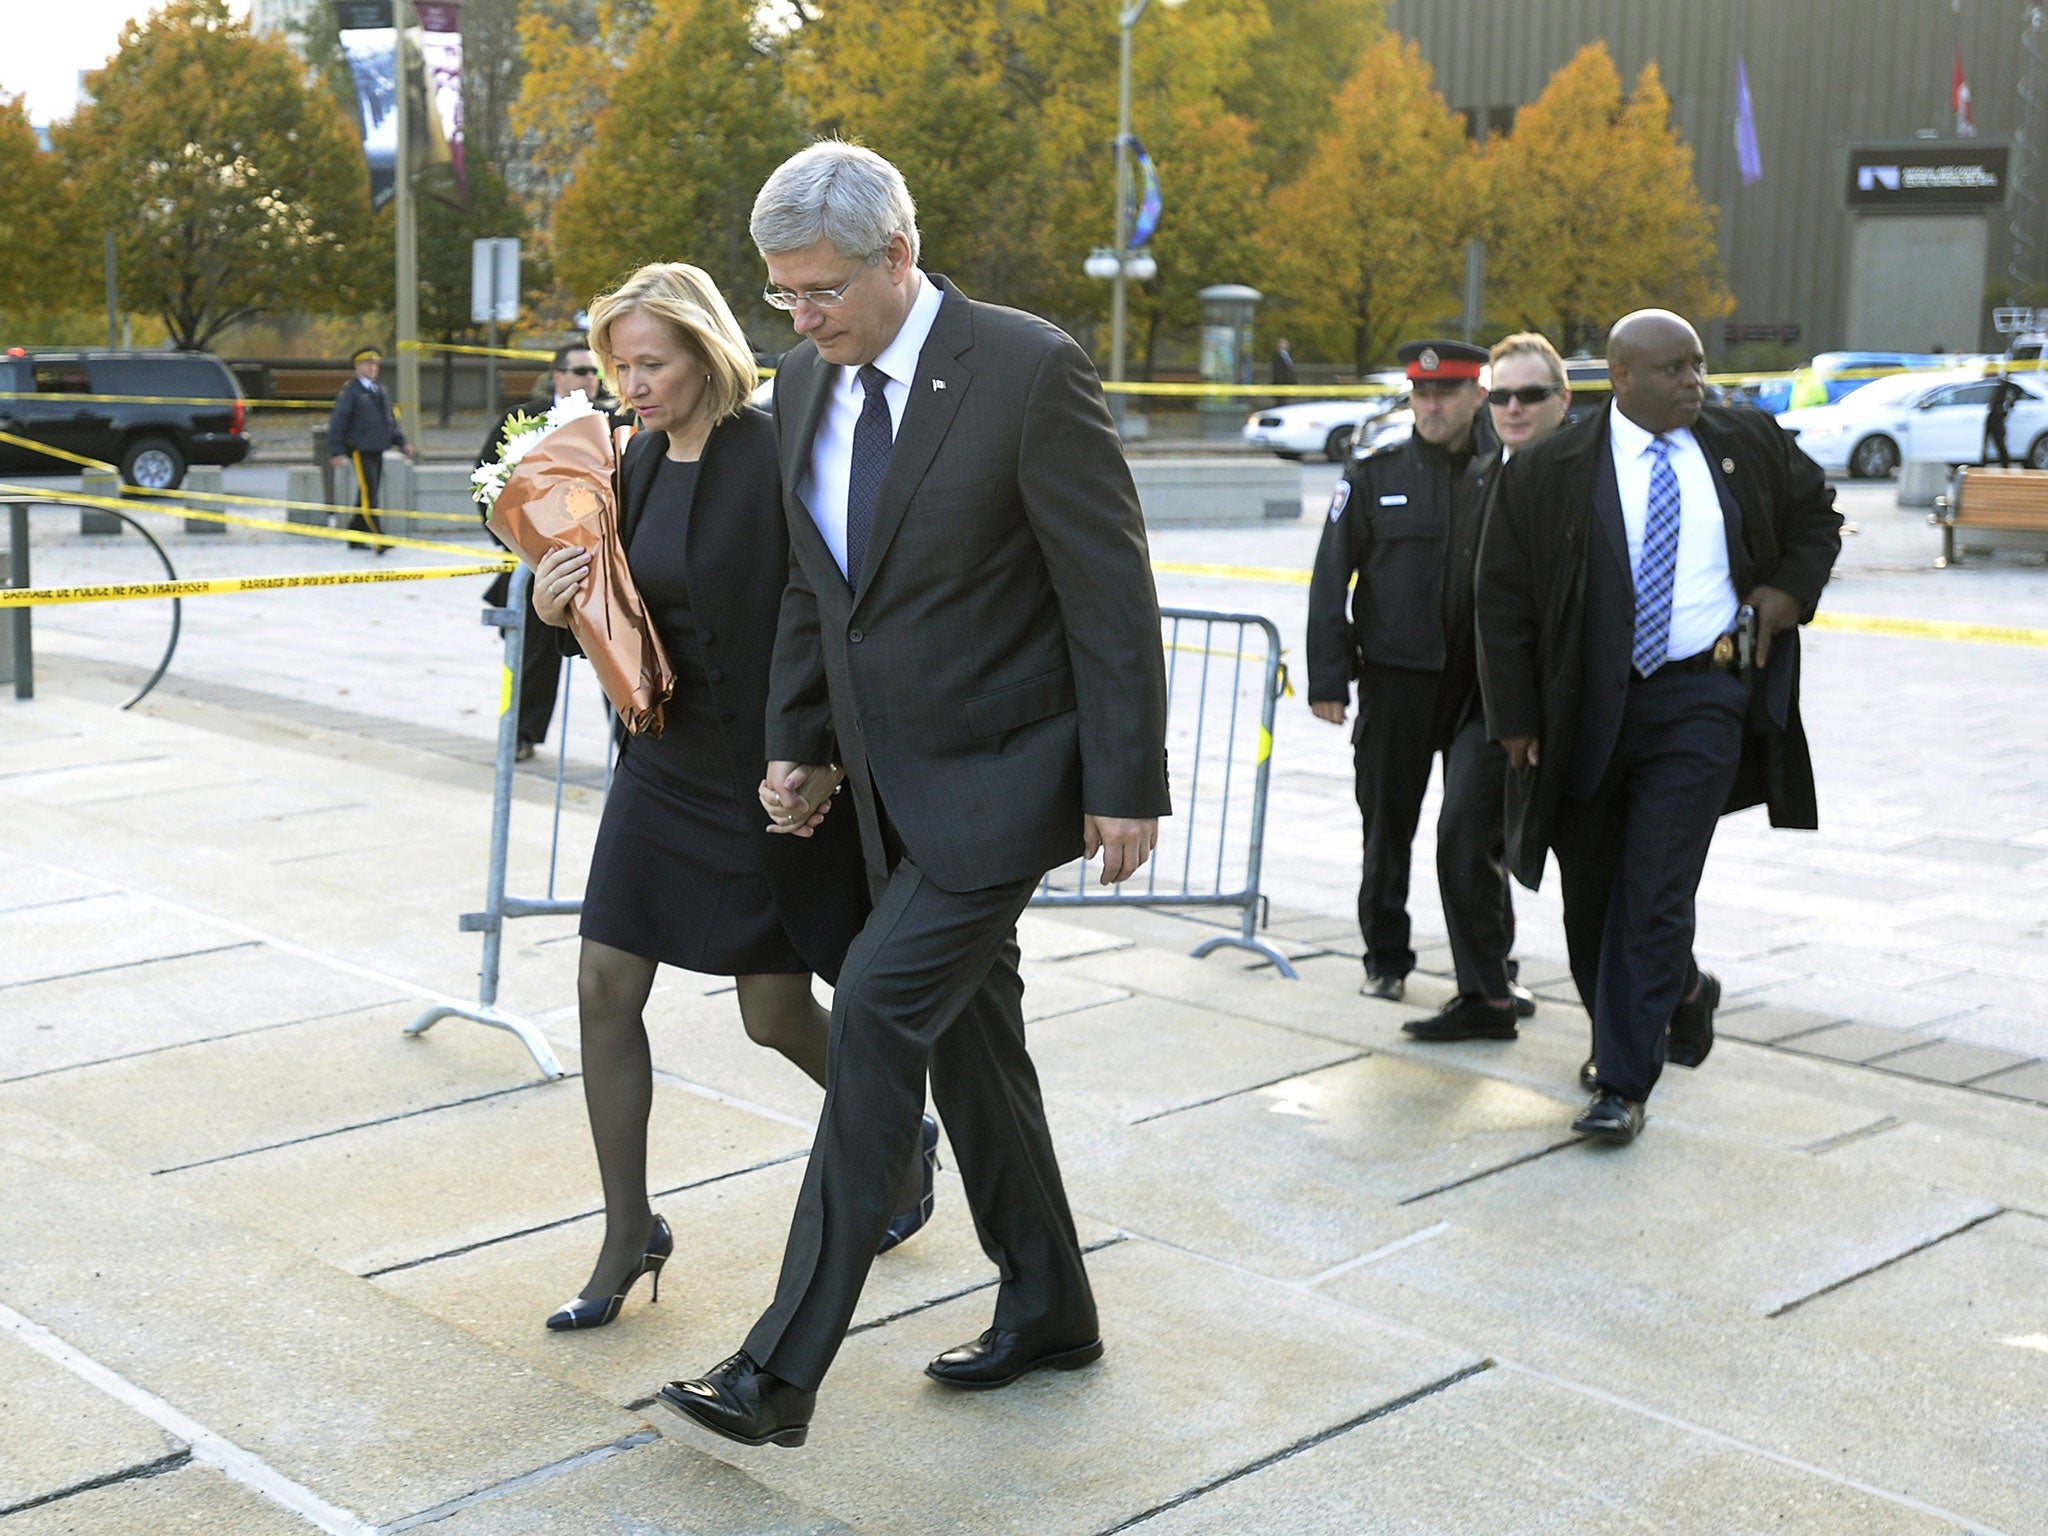 Prime Minister Stephen Harper and his wife Laureen walk up to the perimeter of the National Memorial to lay flowers in Ottawa on Thursday, October 23